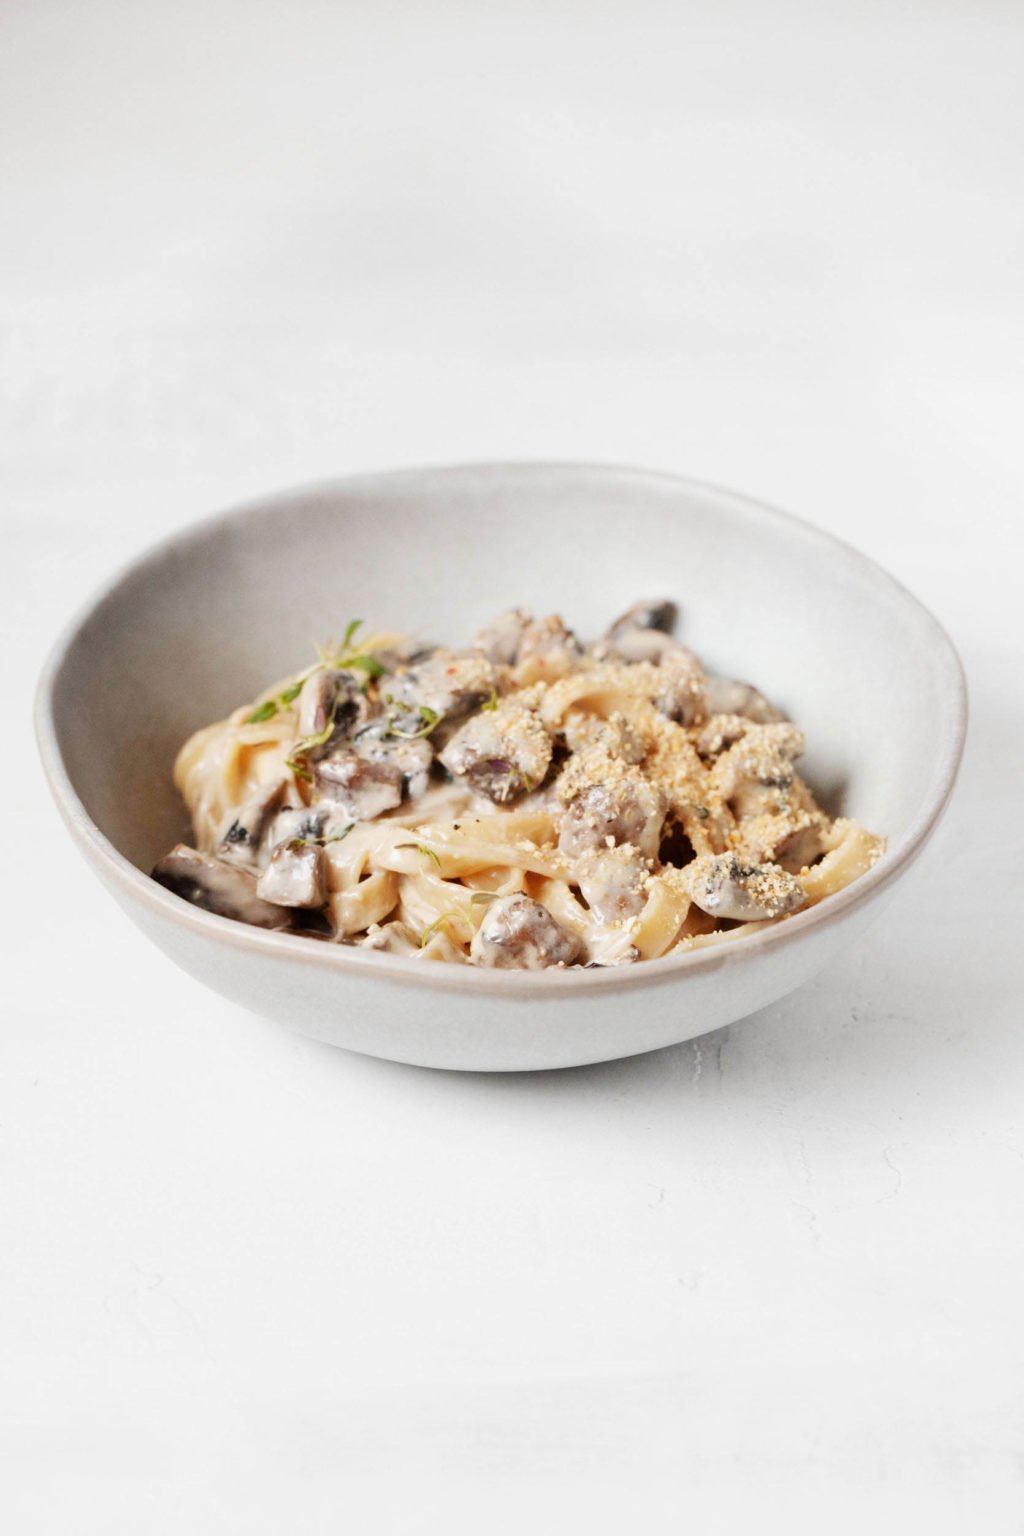 An angled image of a white bowl of vegan creamy mushroom pasta, resting on a white surface.